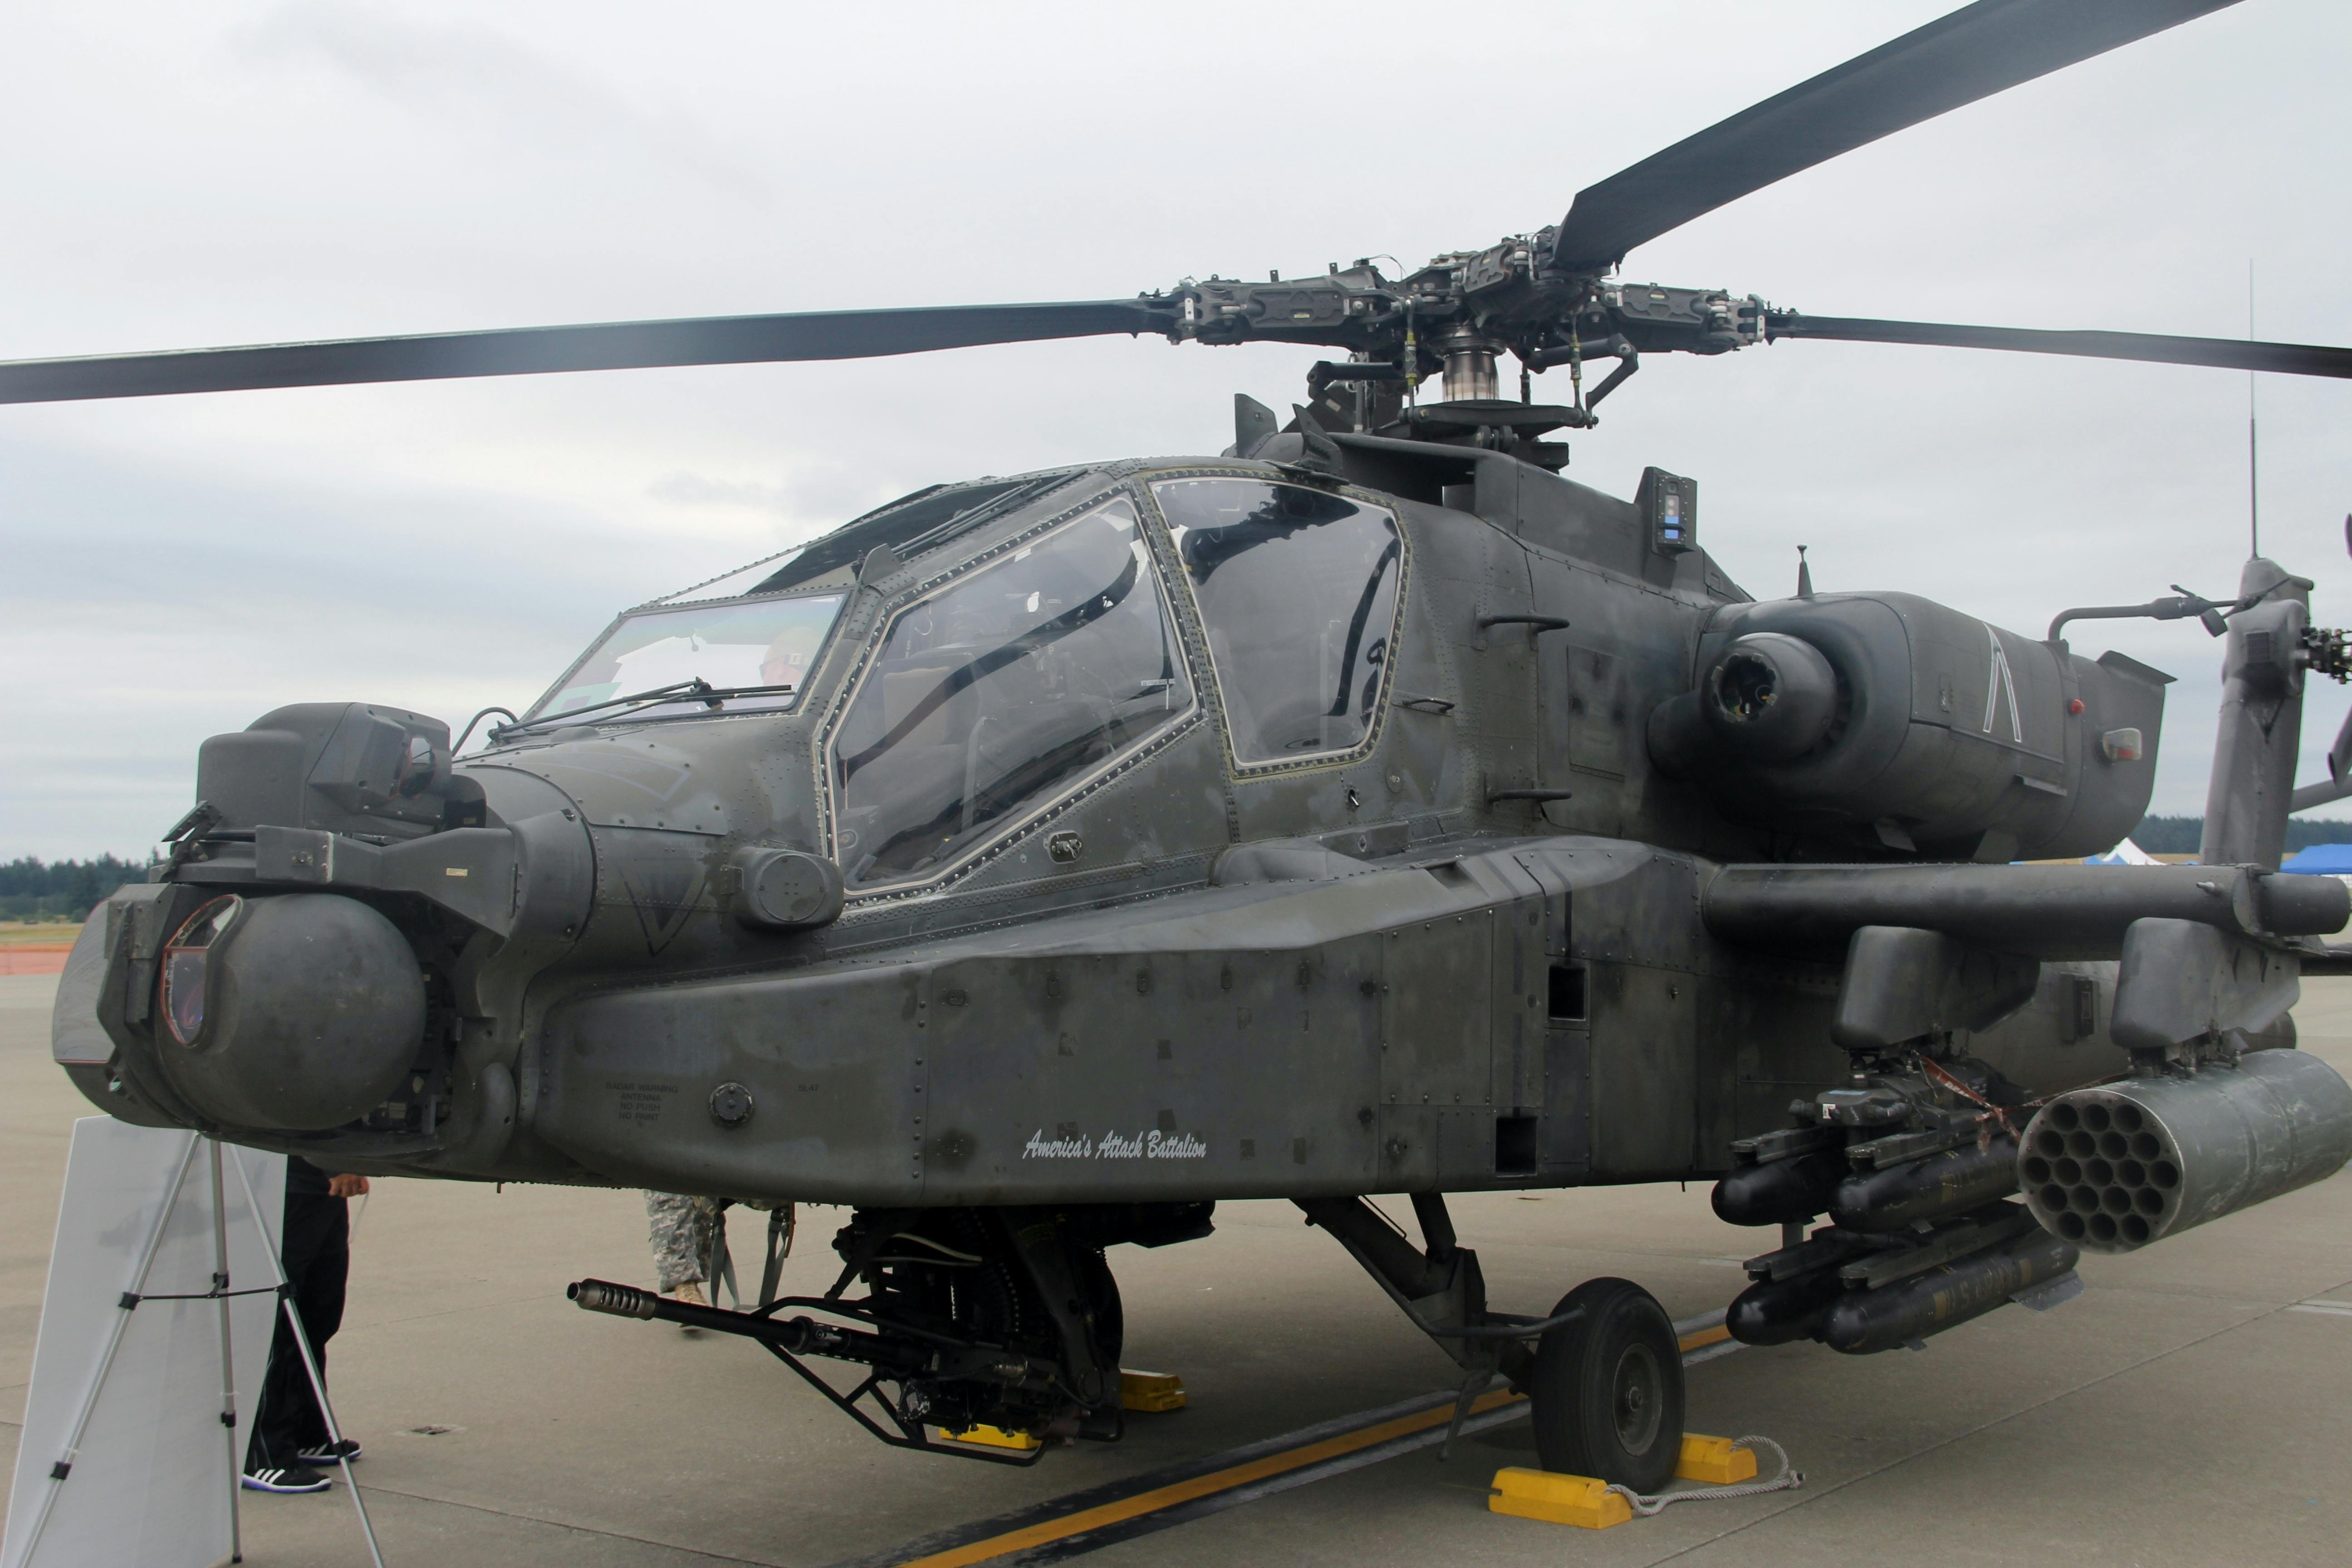 The AH-64 Apache: The deadliest US attack helicopter (with the most  hazardous… air conditioning system?)